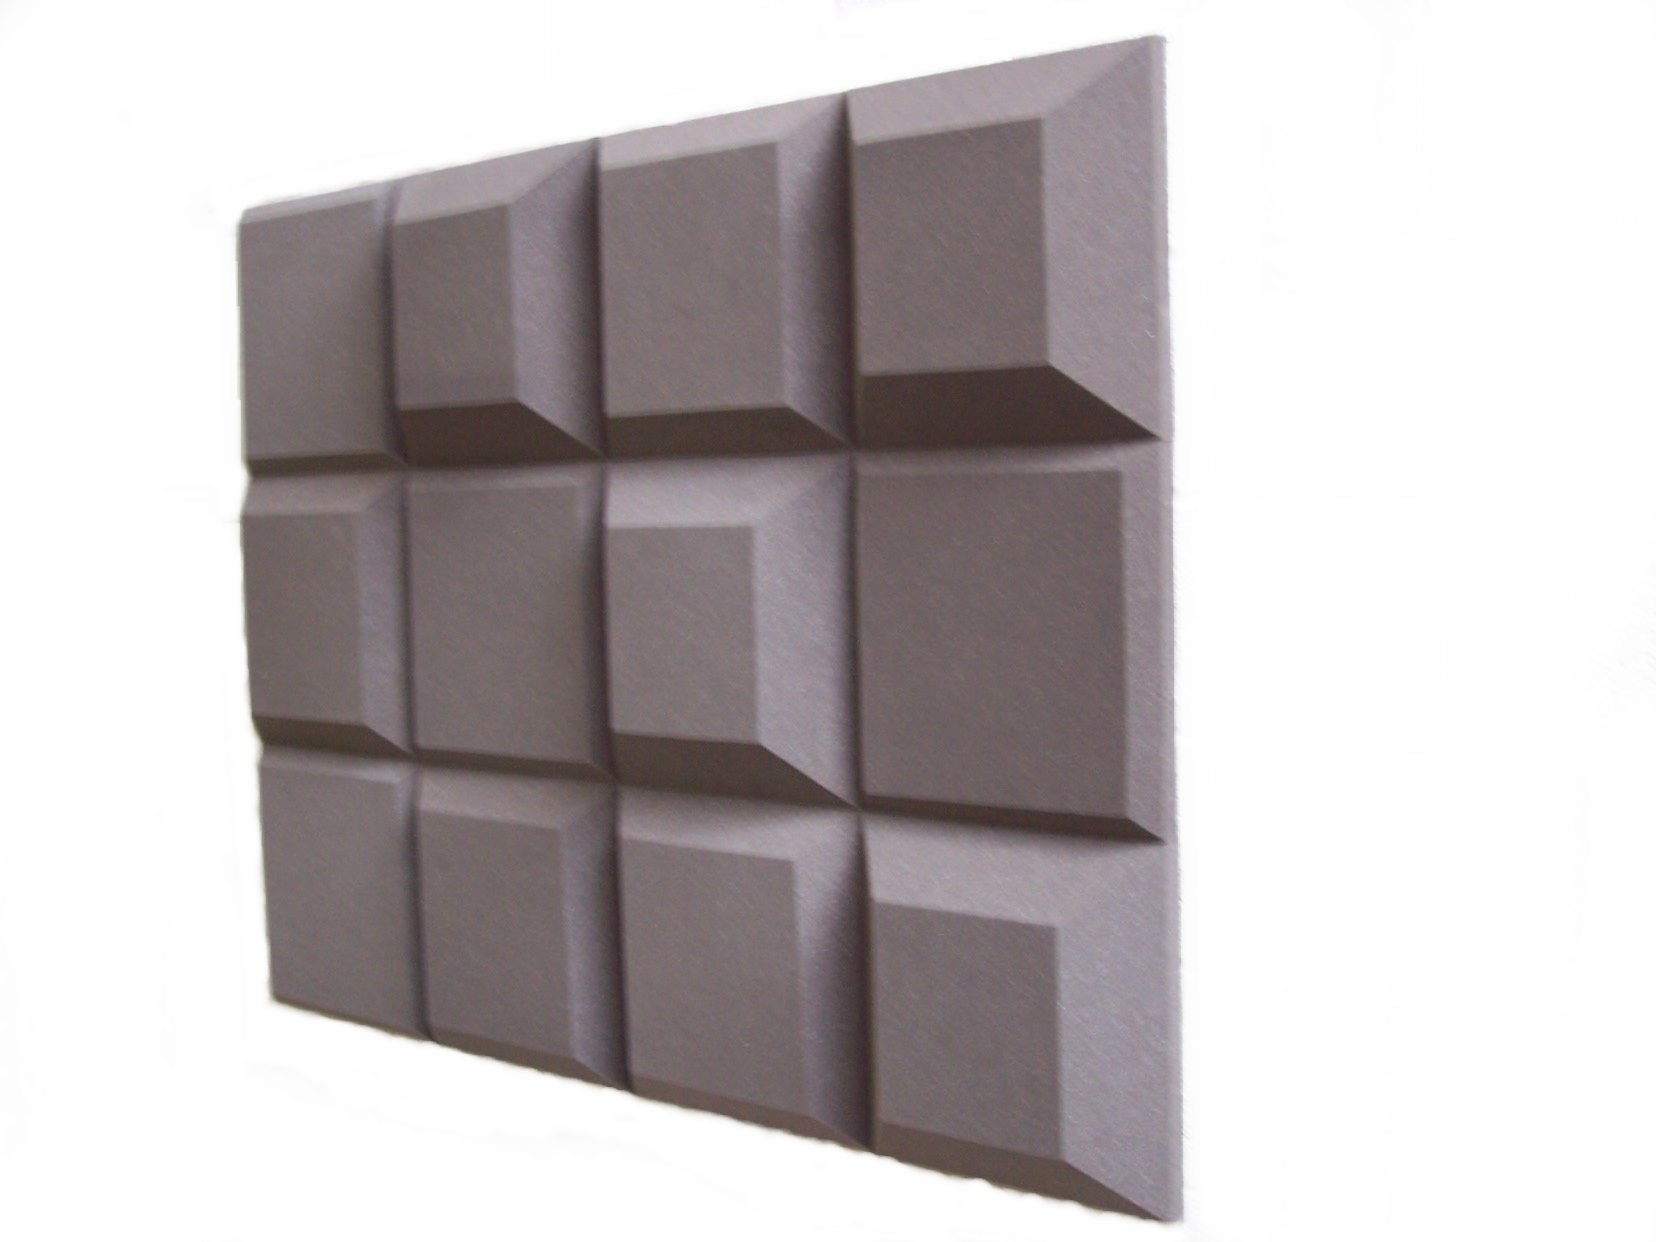 Mixed and matched Tegular sound absorbing tiles